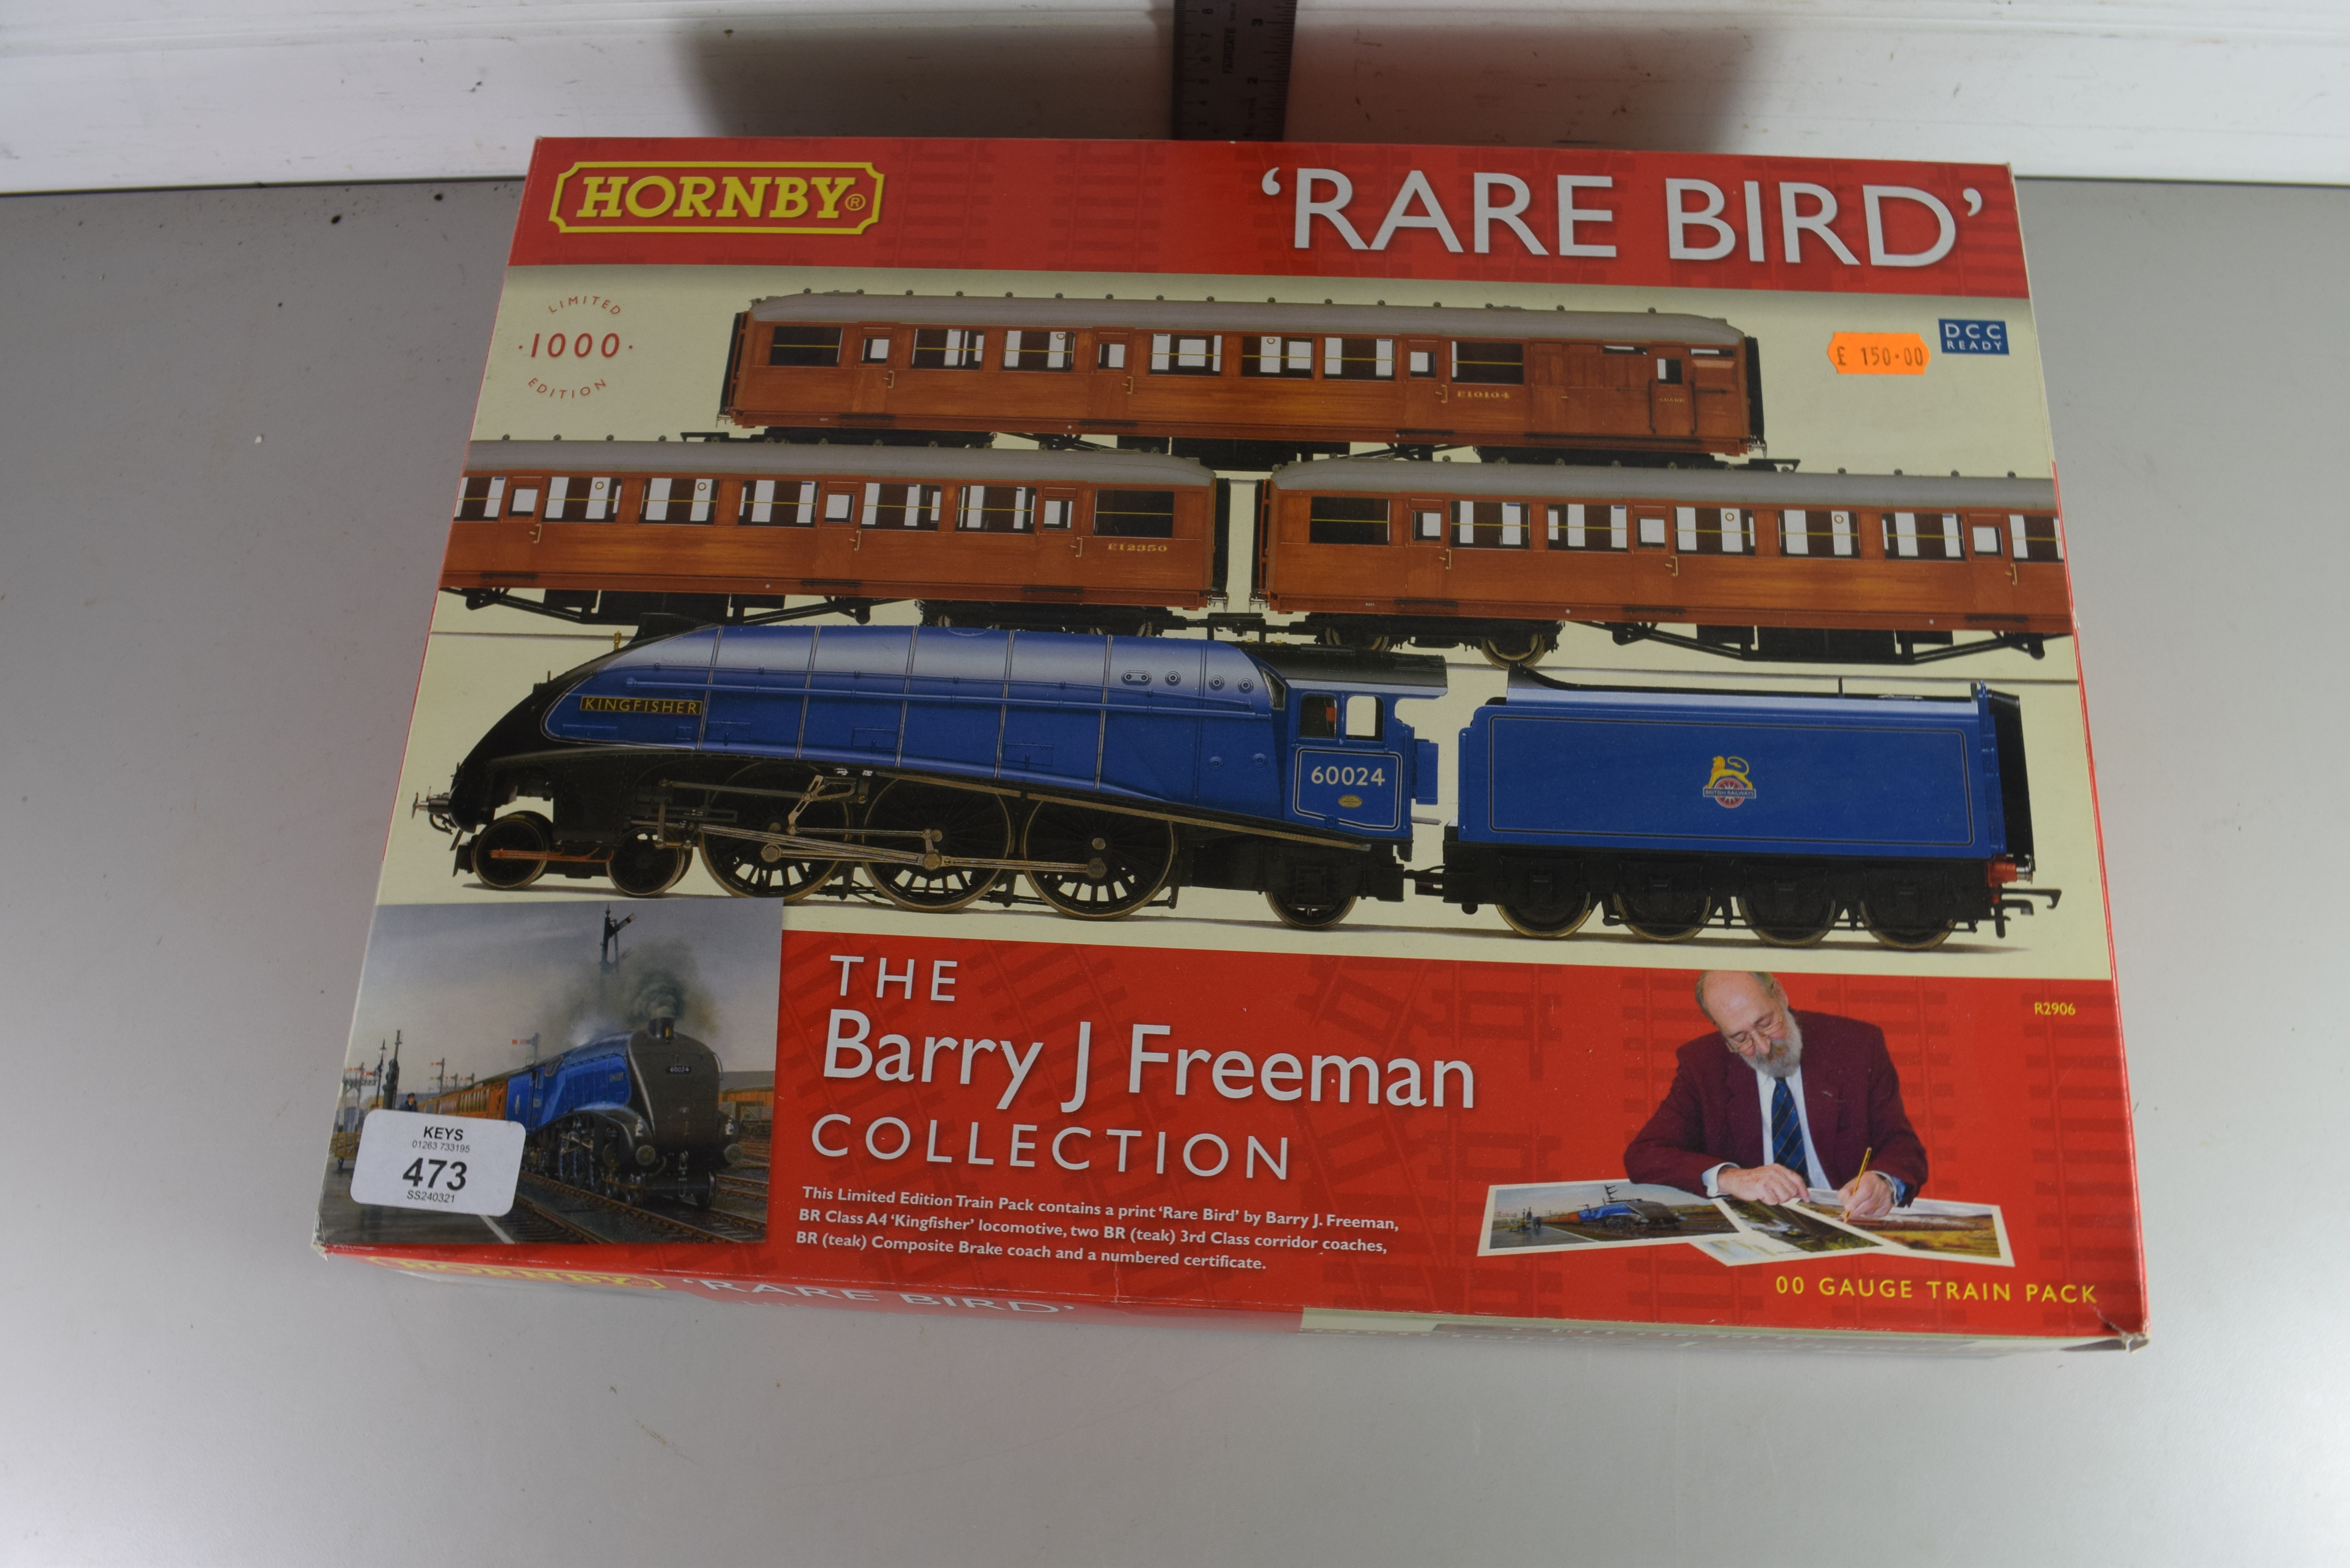 Boxed Hornby 00 gauge Rare Bird from the Barry J Freeman collection set containing Kingfisher No